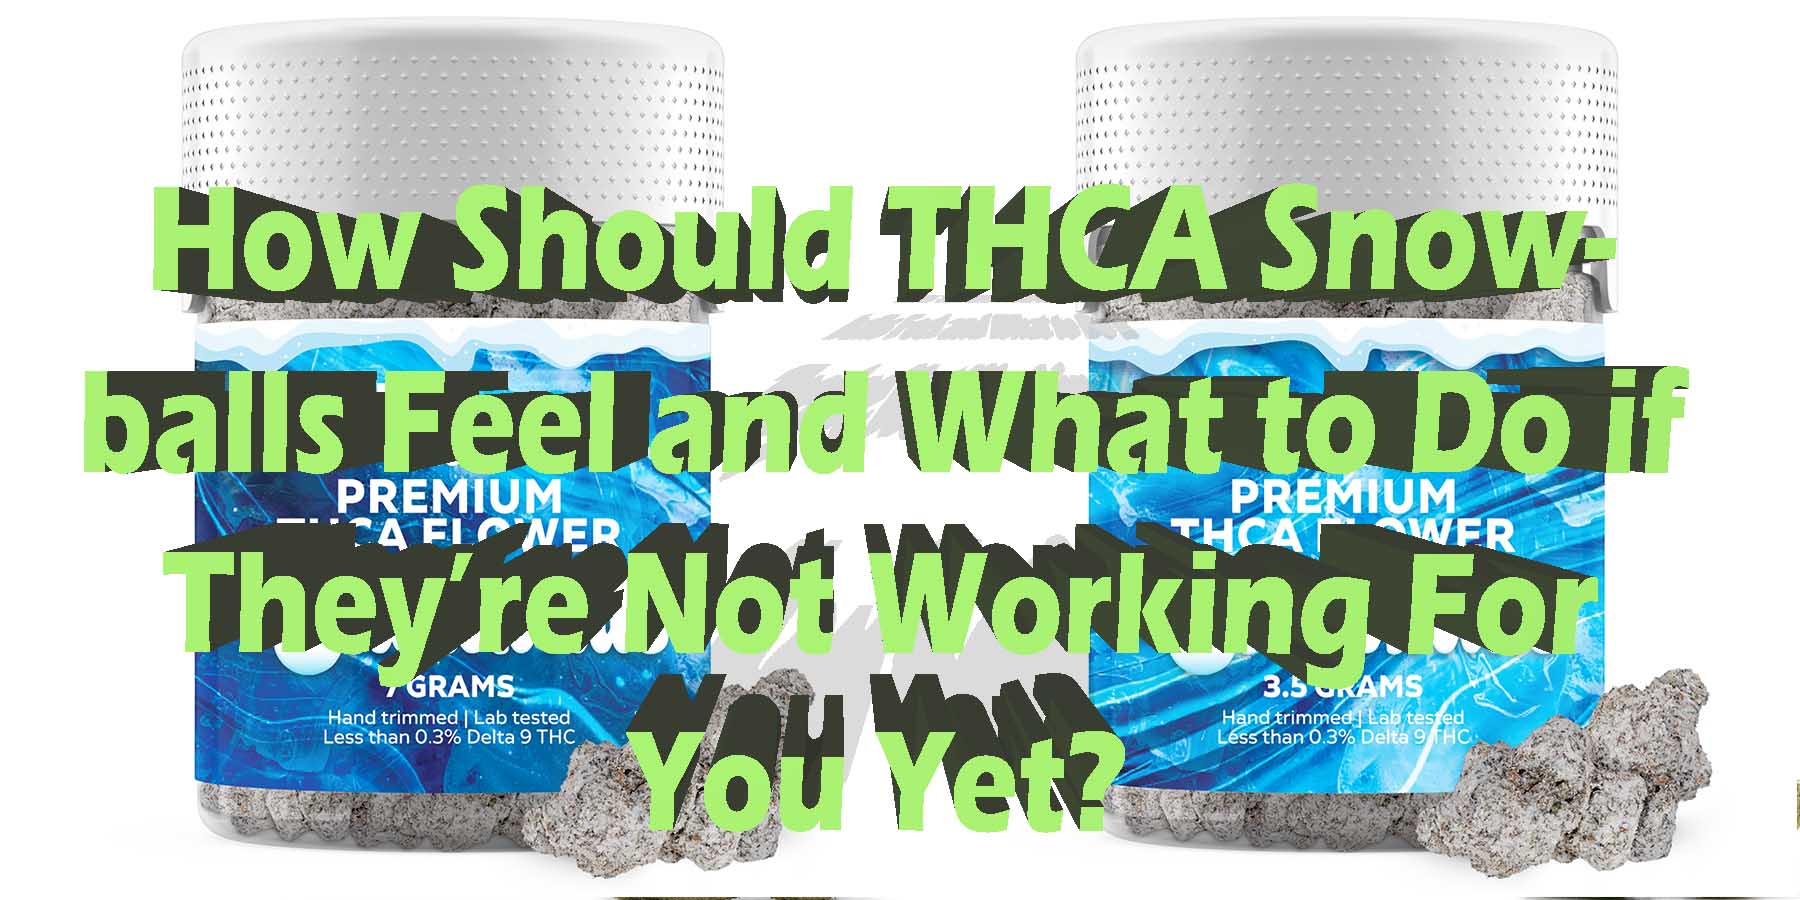 How Should THCA Snowballs Feel and What to Do if Theyre Not Working For You Yet Report Coupon Discount For Smoking Best High Smoke Shop Online